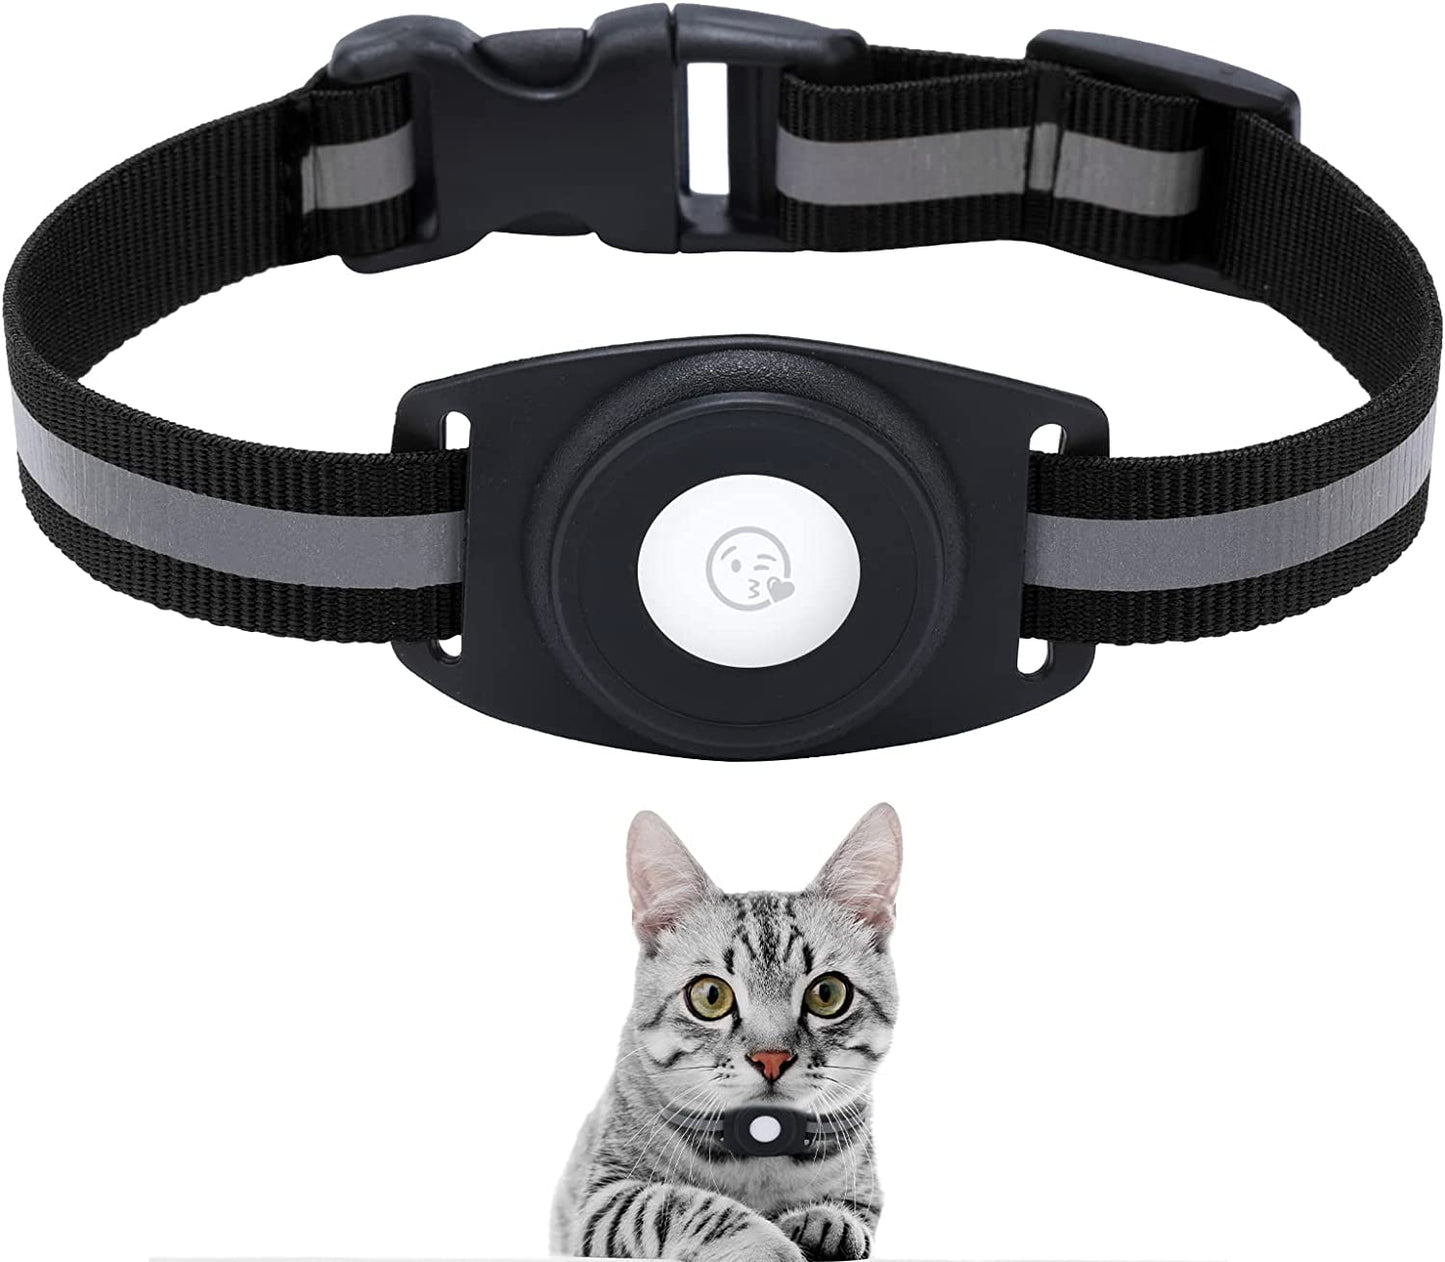 Simplethings for Airtag Cat Collar, Reflective Collar Designed for Airtag Small Pets Cat Puppy Dog Collar (Black)